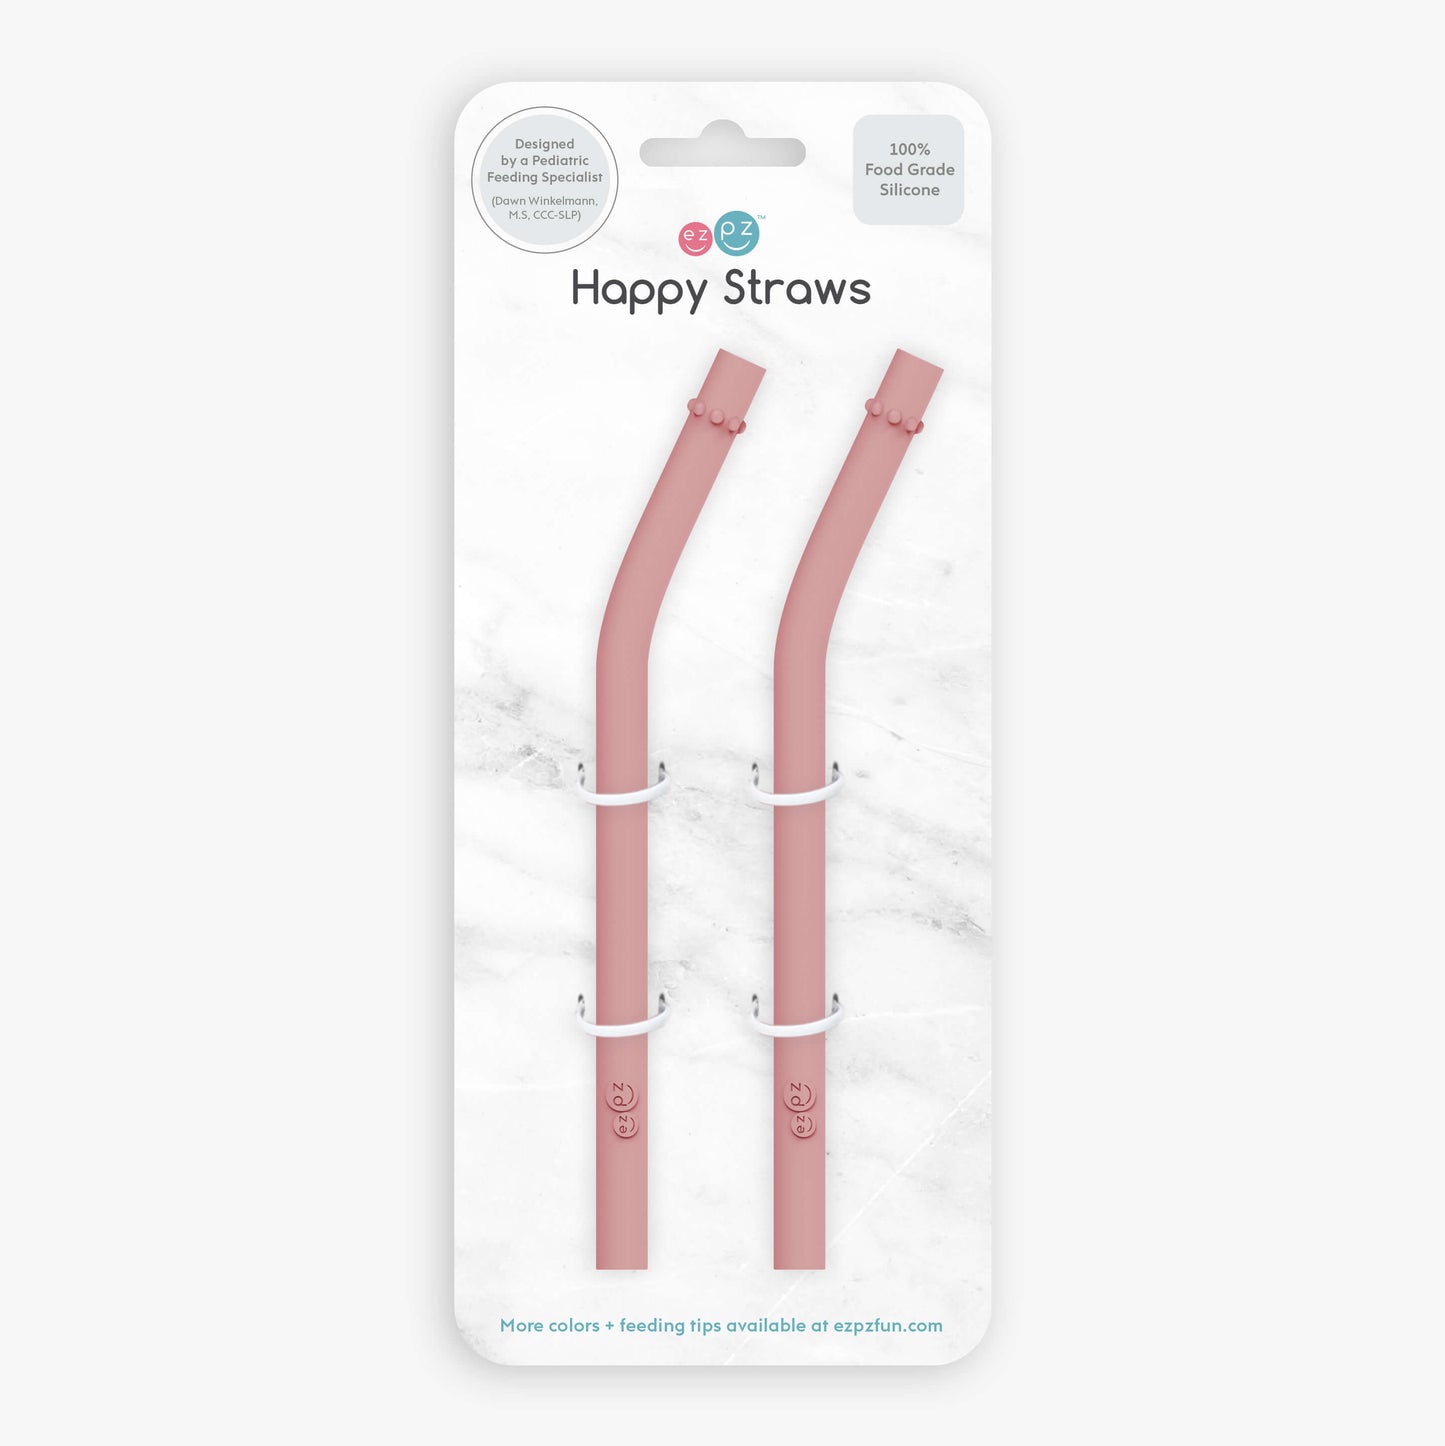 Happy Straws in Blush / Silicone Straw Replacement Pack for the ezpz Happy Cup & Straw System